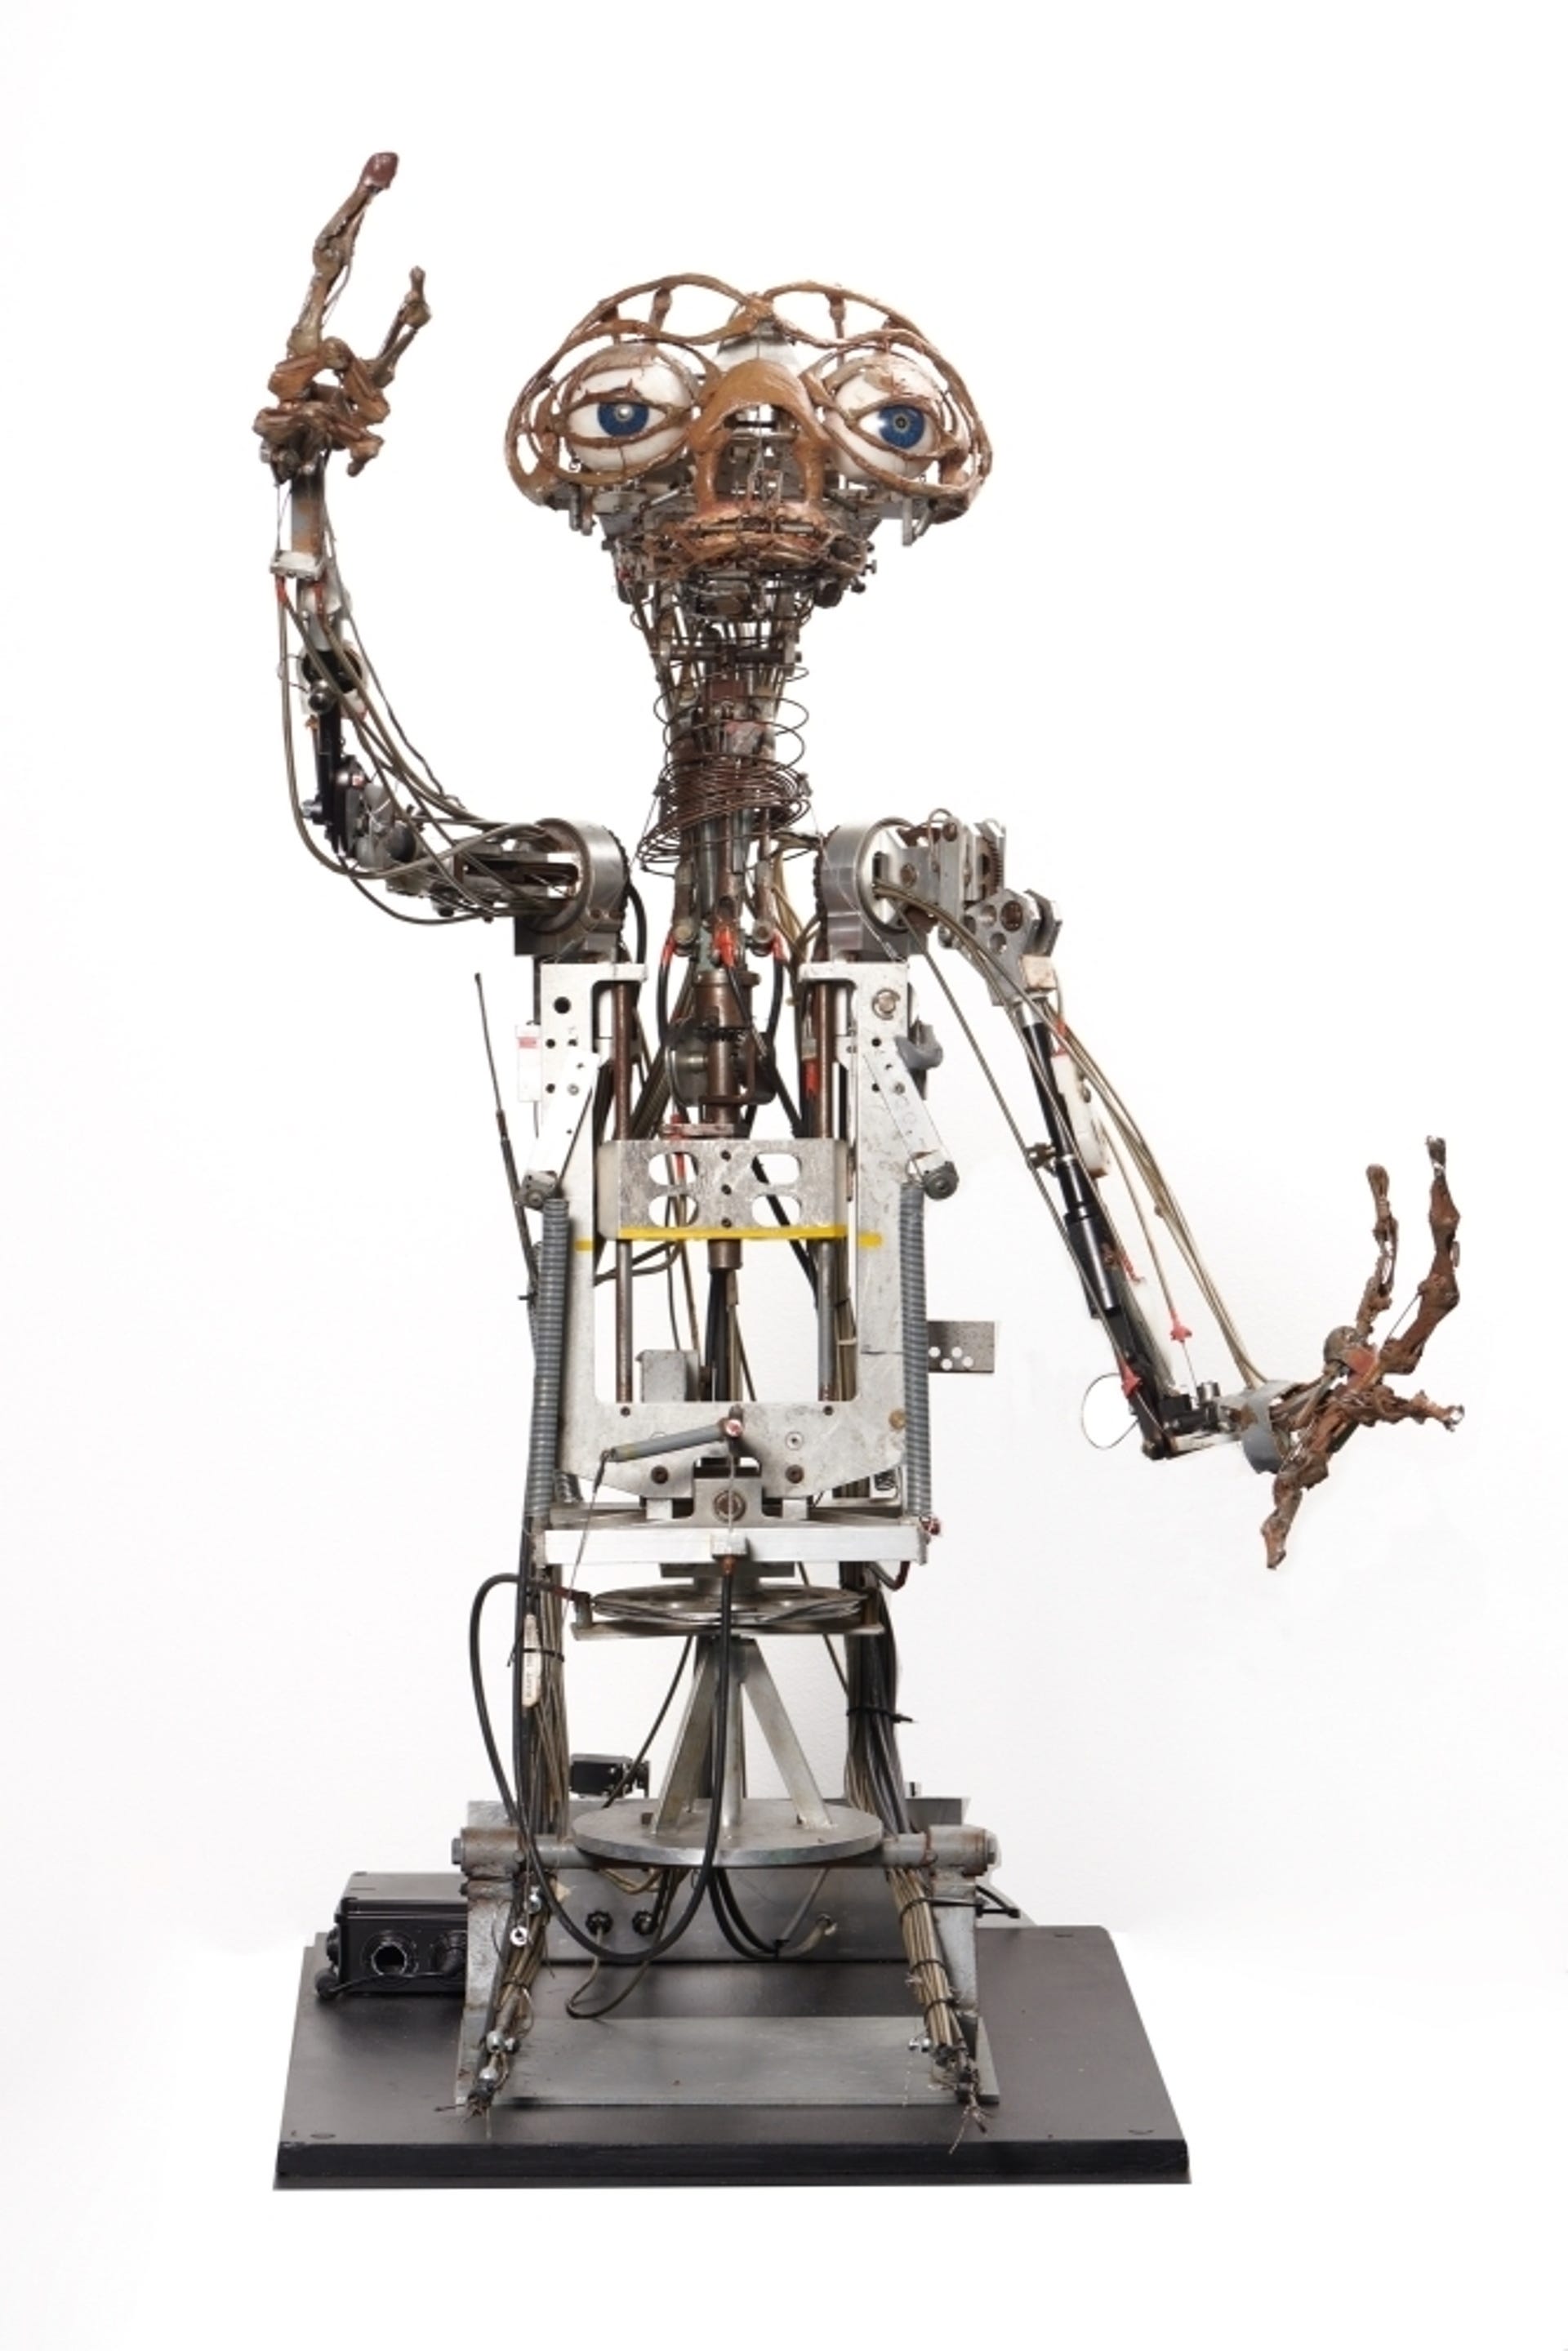 Skeletonized animatronic model of E.T. from the movie shows all the robotic components like a skin-less skeleton.